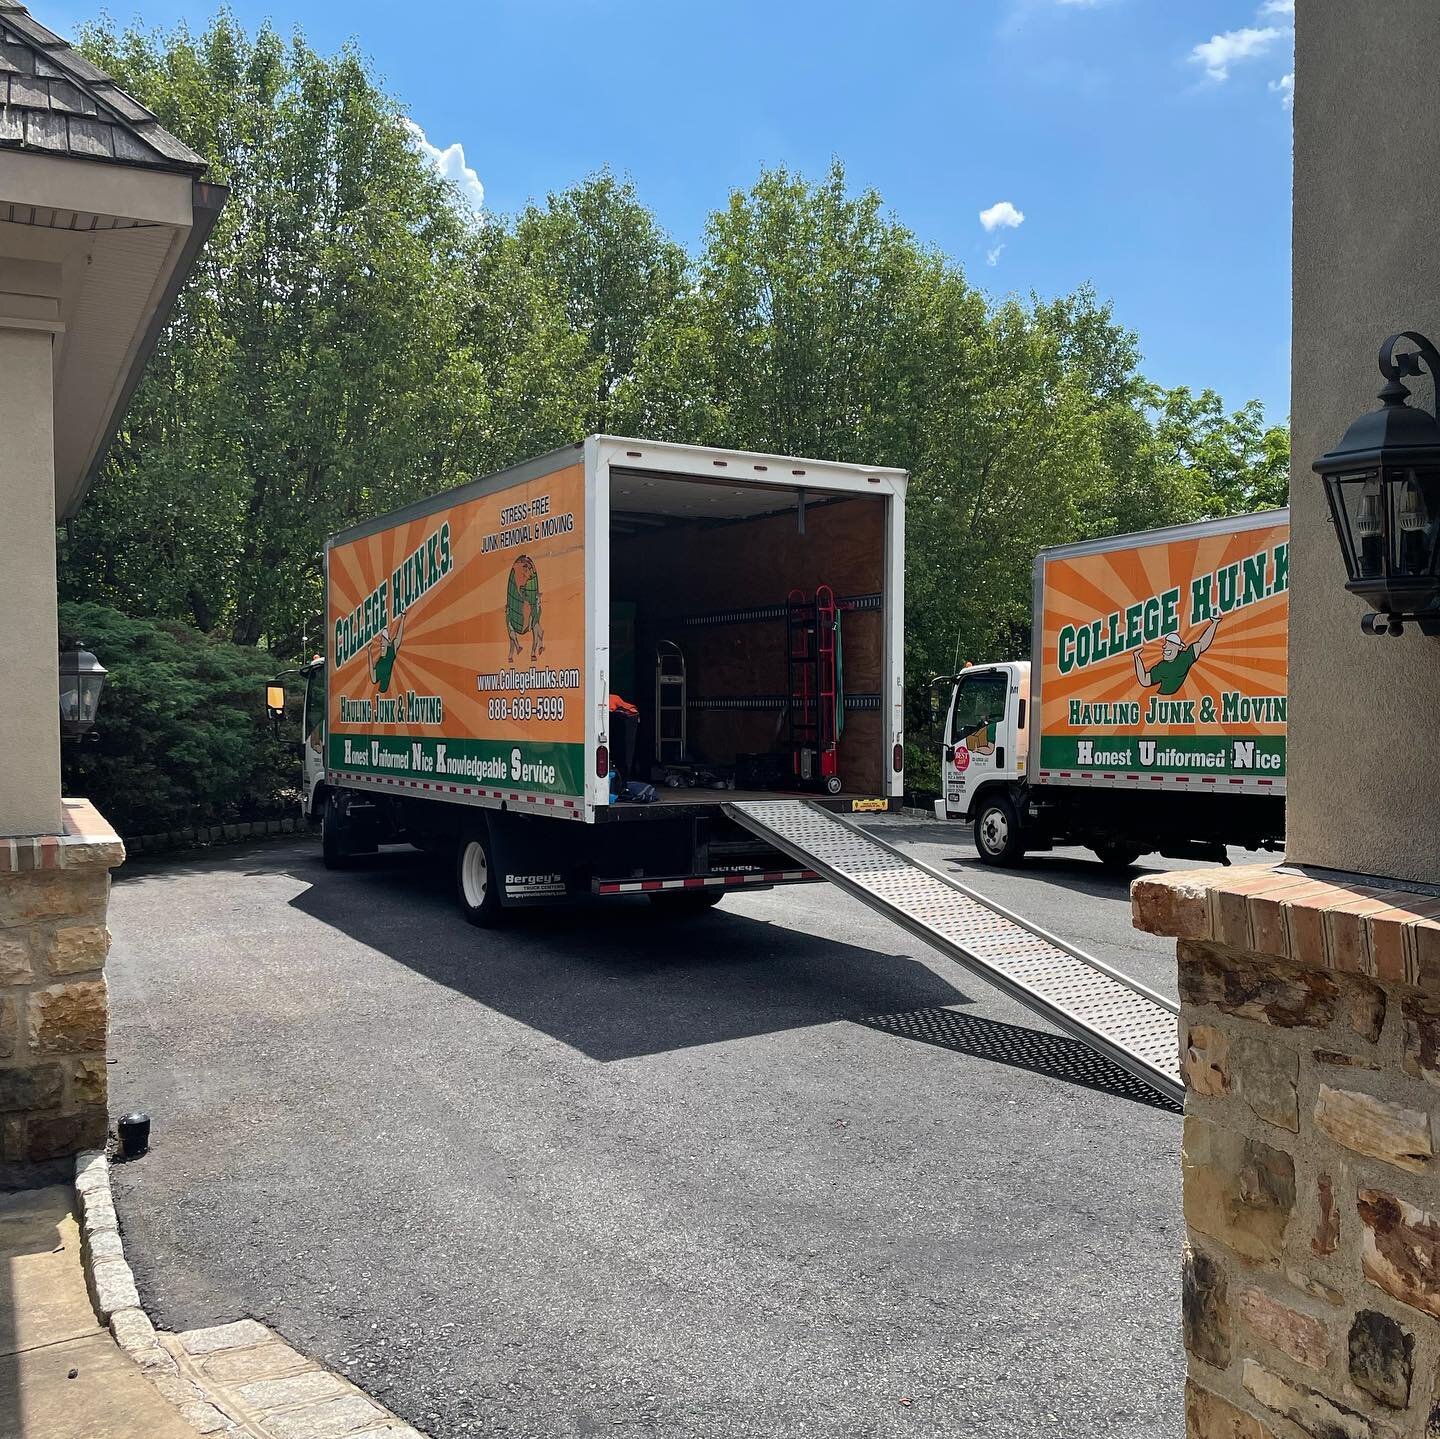 Moving day at a client property. Huge shout out to @collegehunksbucksmont for being able to do a SUPER last minute move for us. And how cool is it that the owners wanted all the left over furniture (there was a lot of very nice stuff) to go to @habit